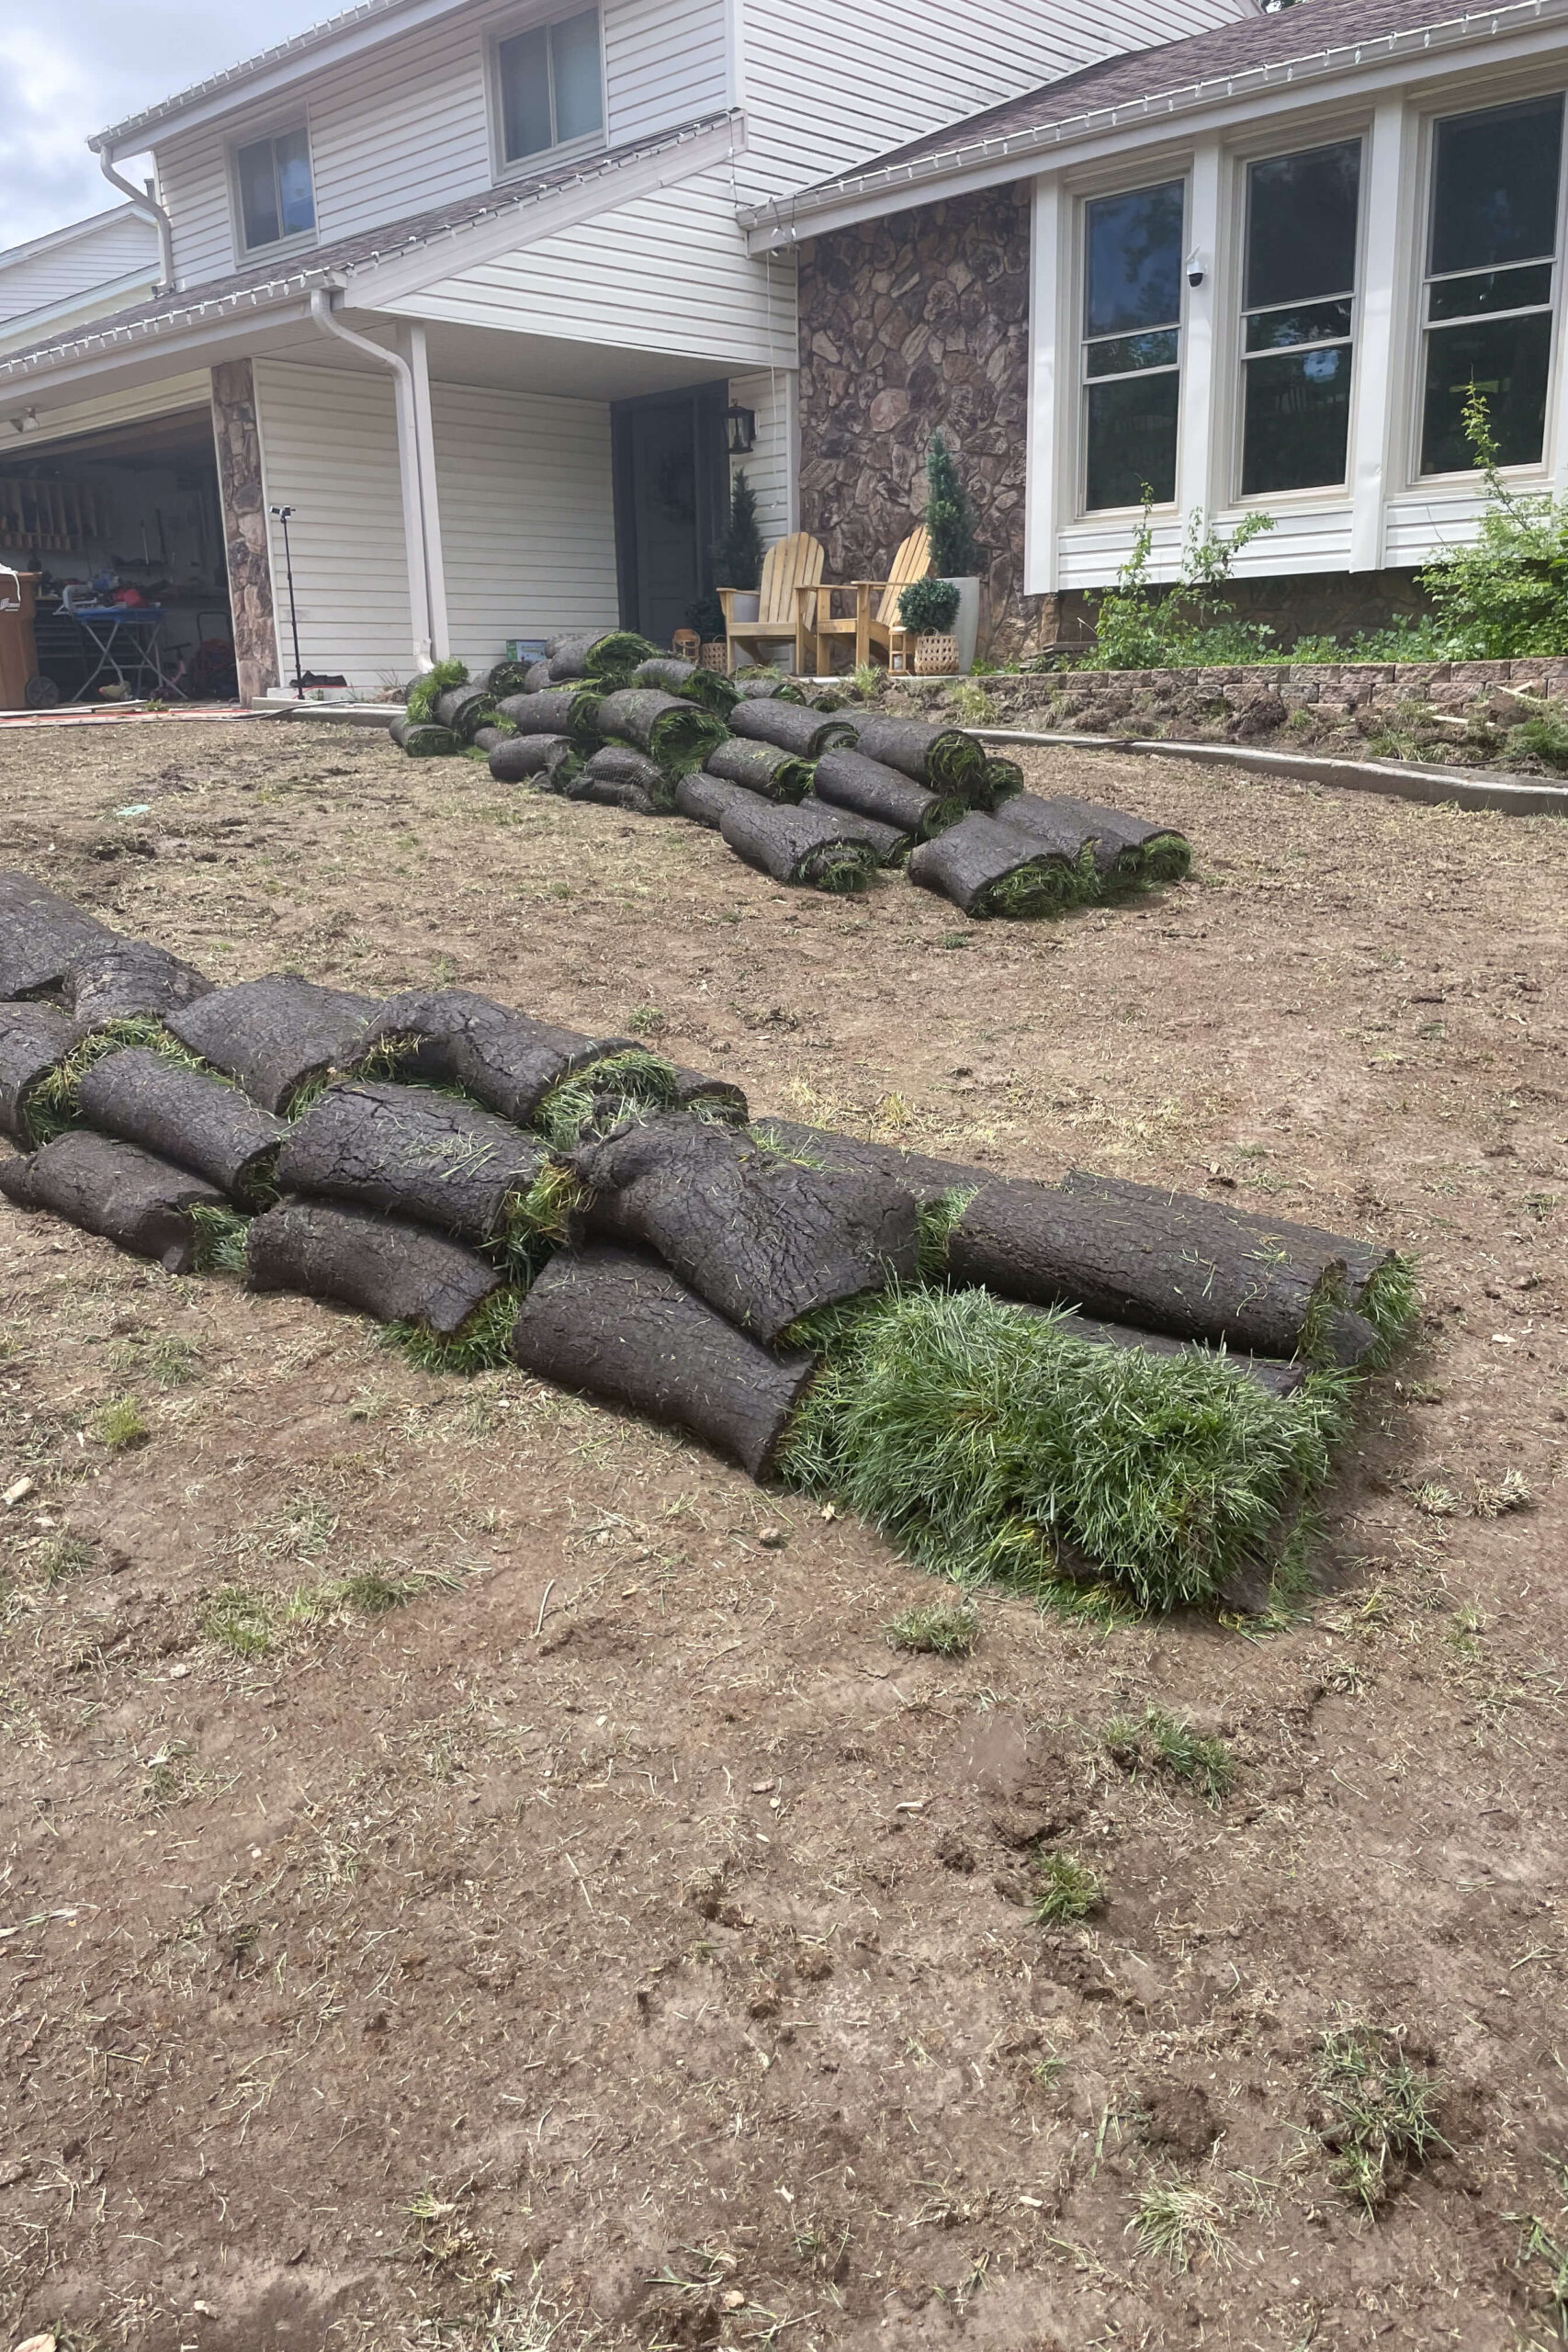 Piles of rolls of sod all over the yard.